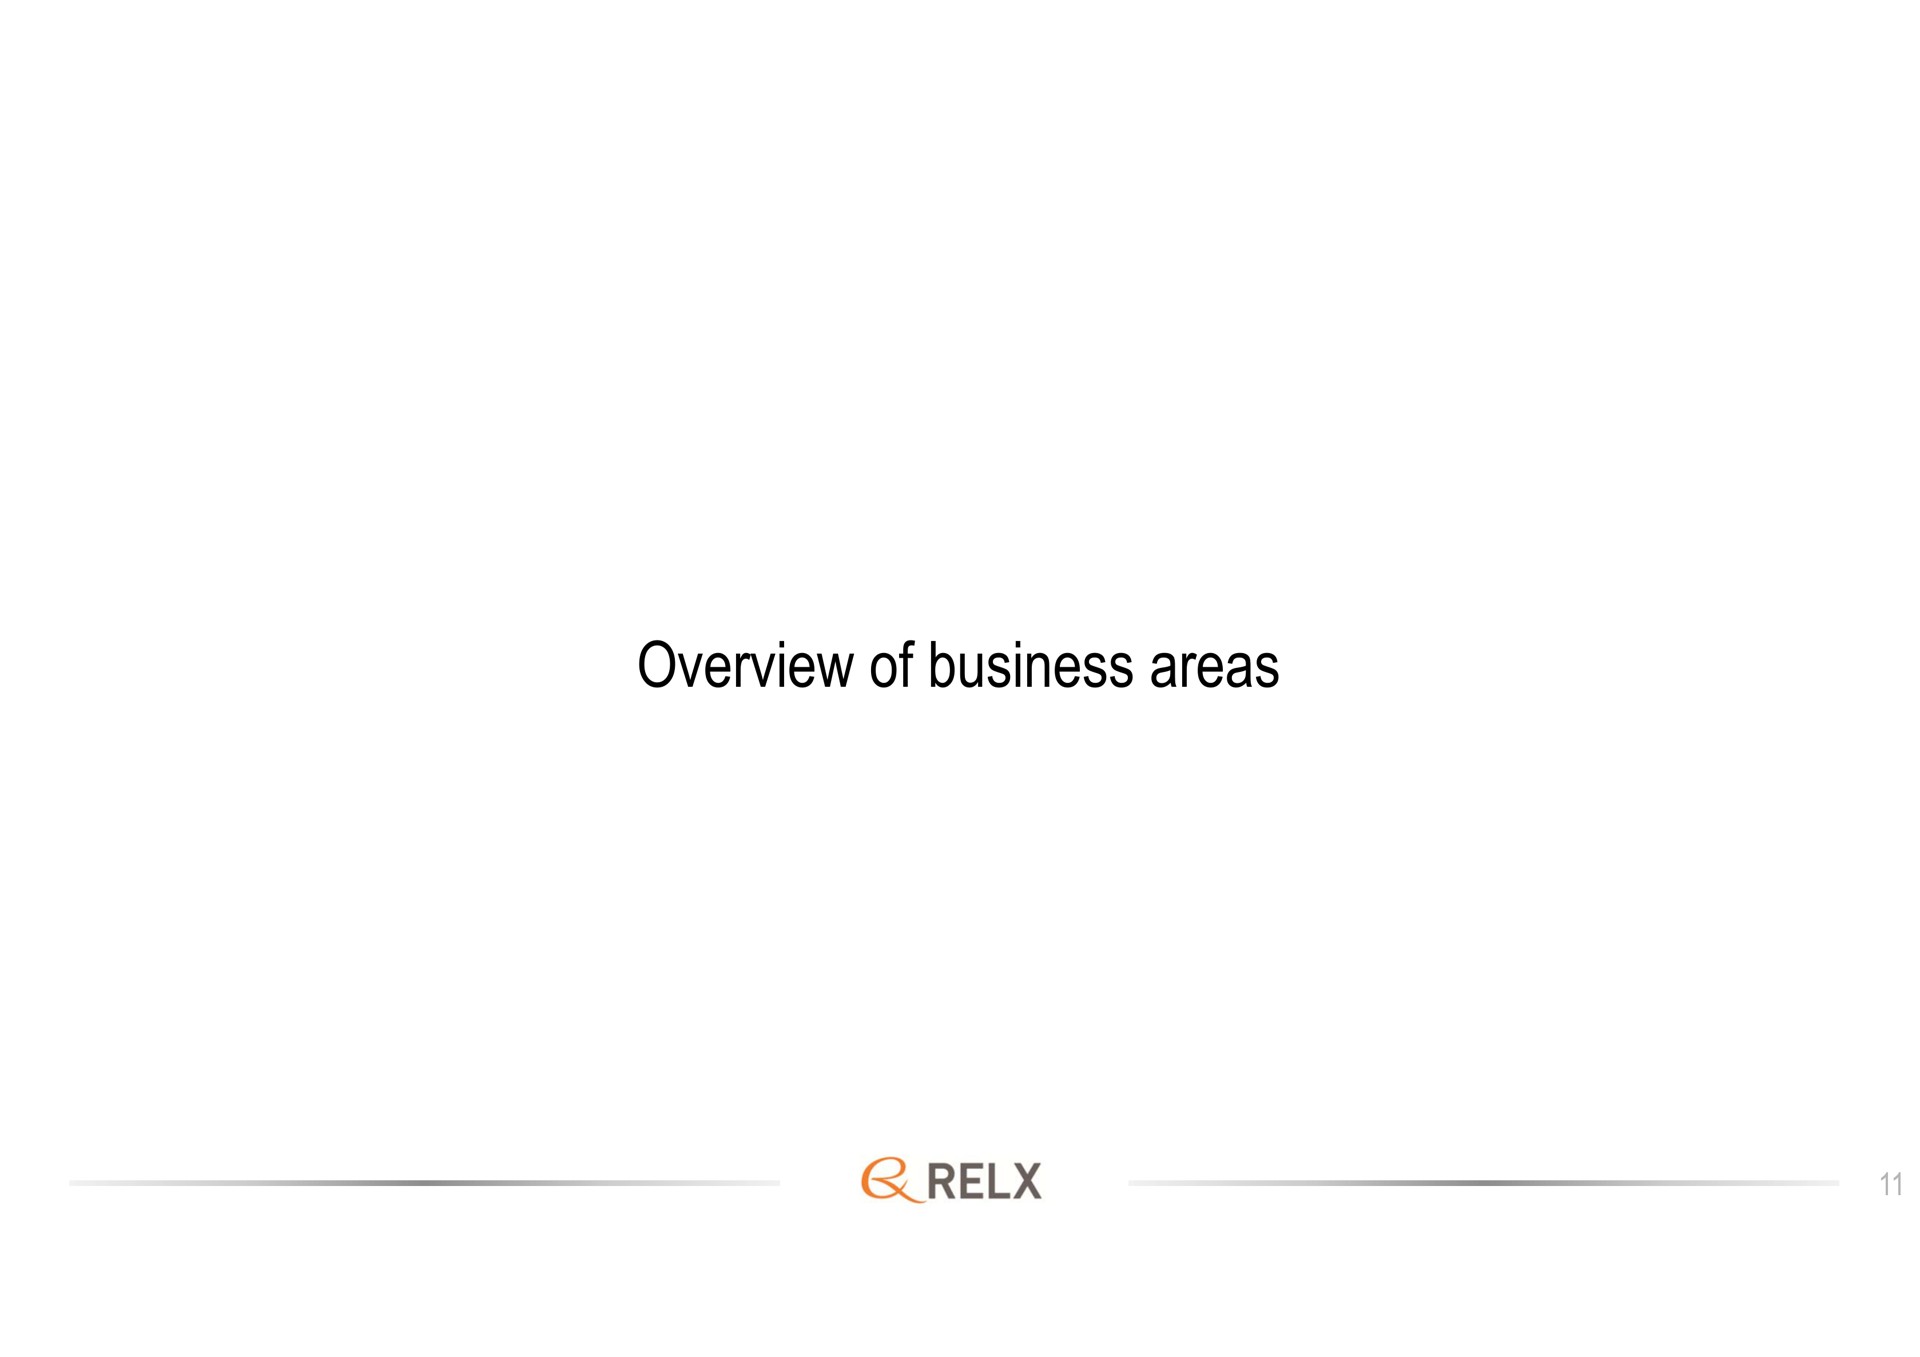 overview of business areas | RELX